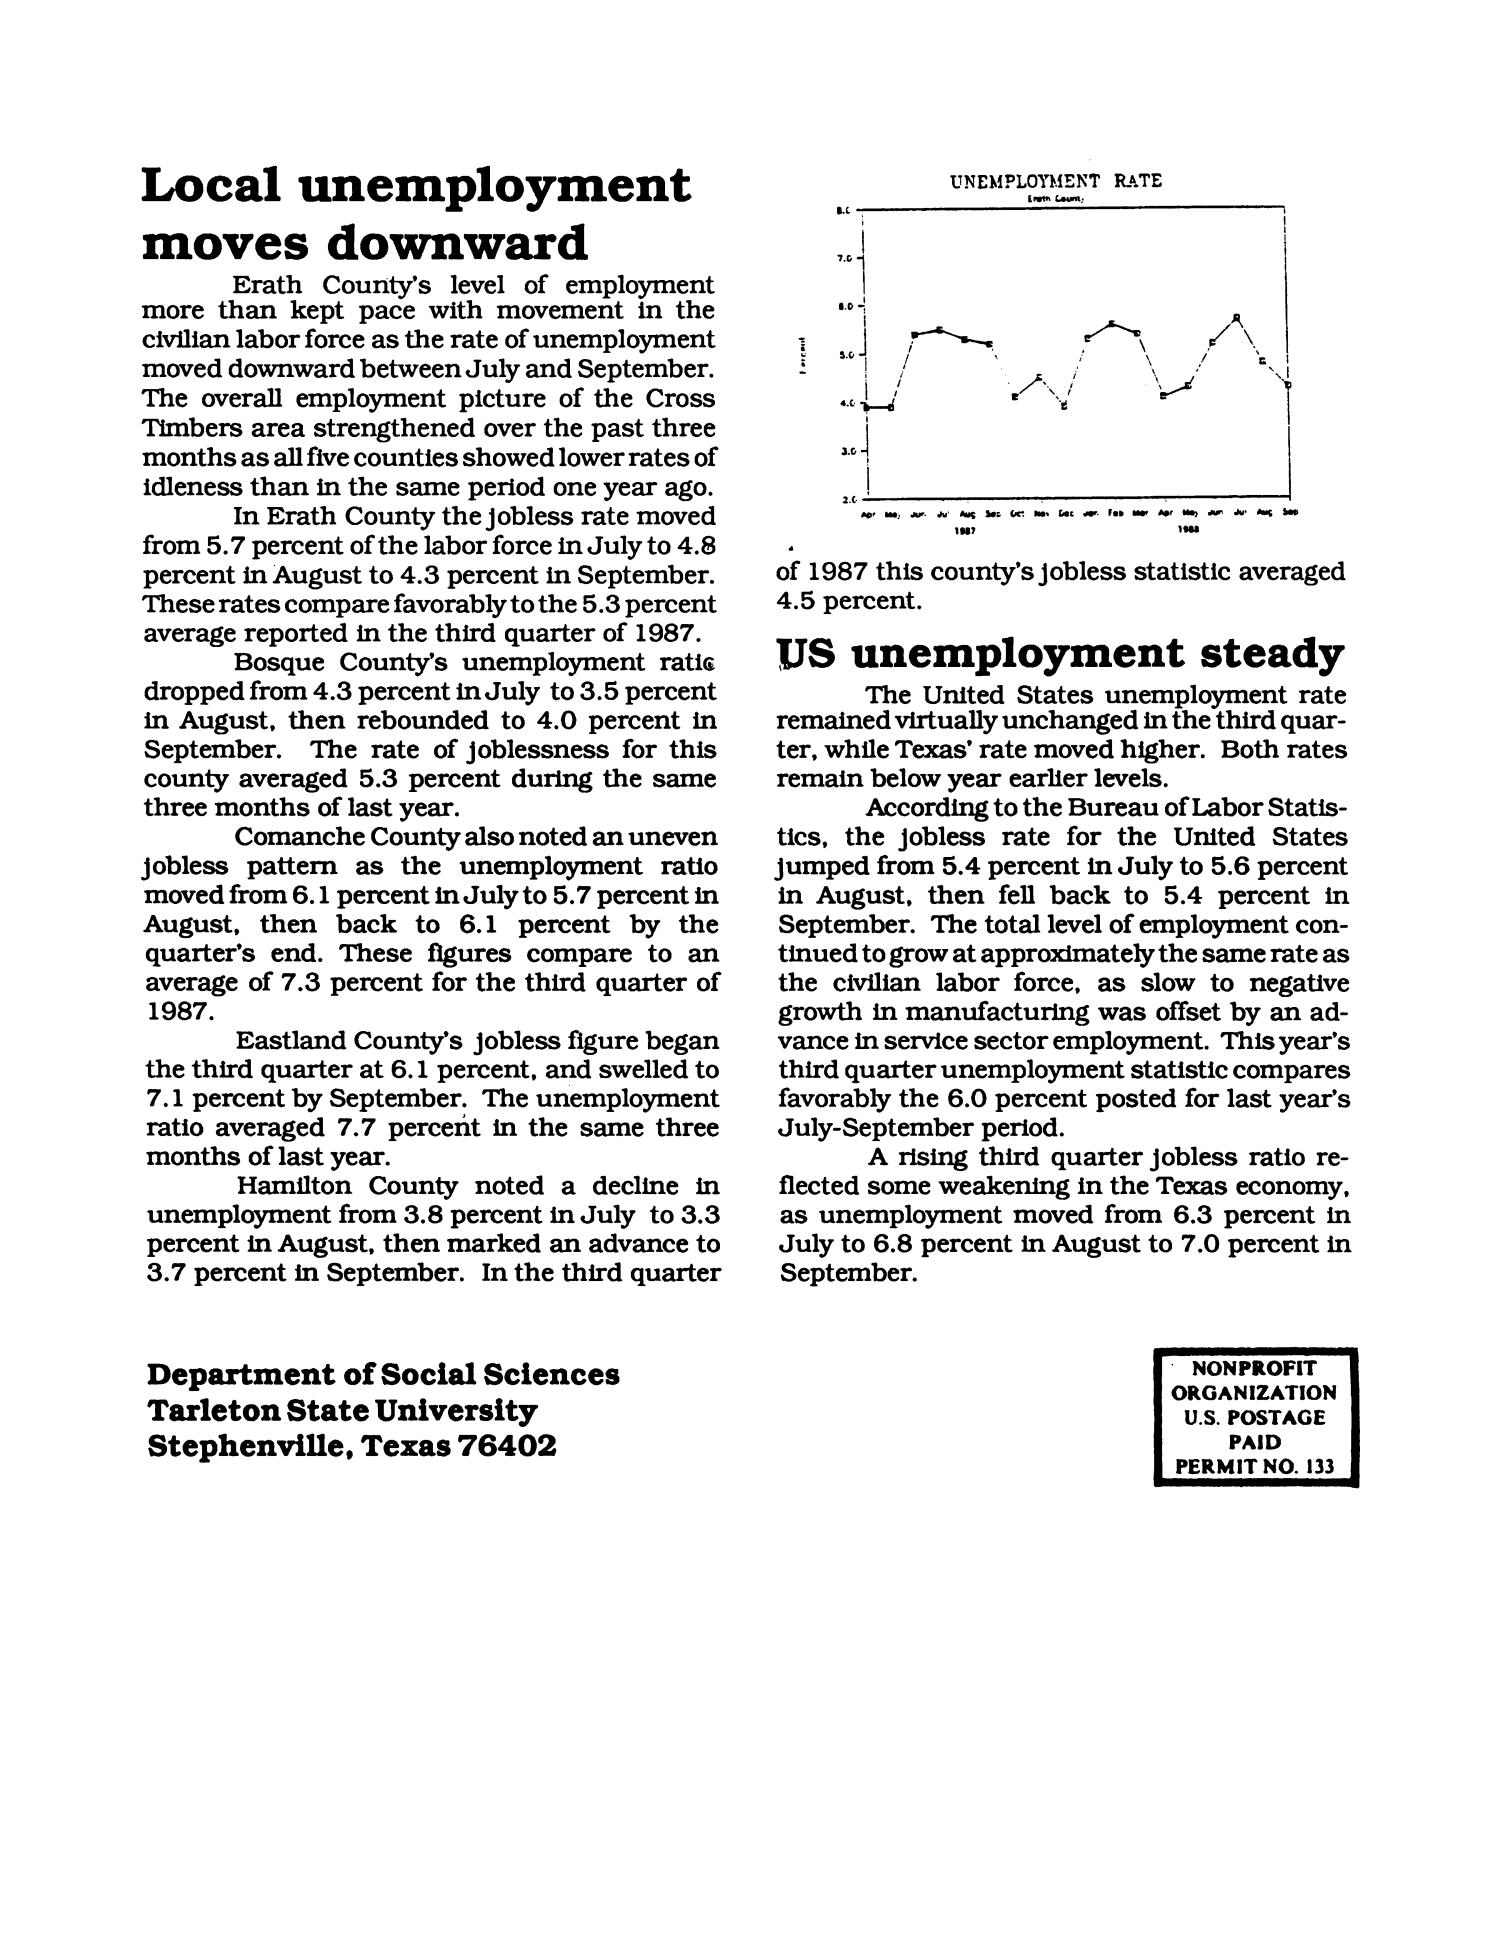 Cross Timbers Business Report, Volume 3, Number 1, Fall 1988
                                                
                                                    4
                                                